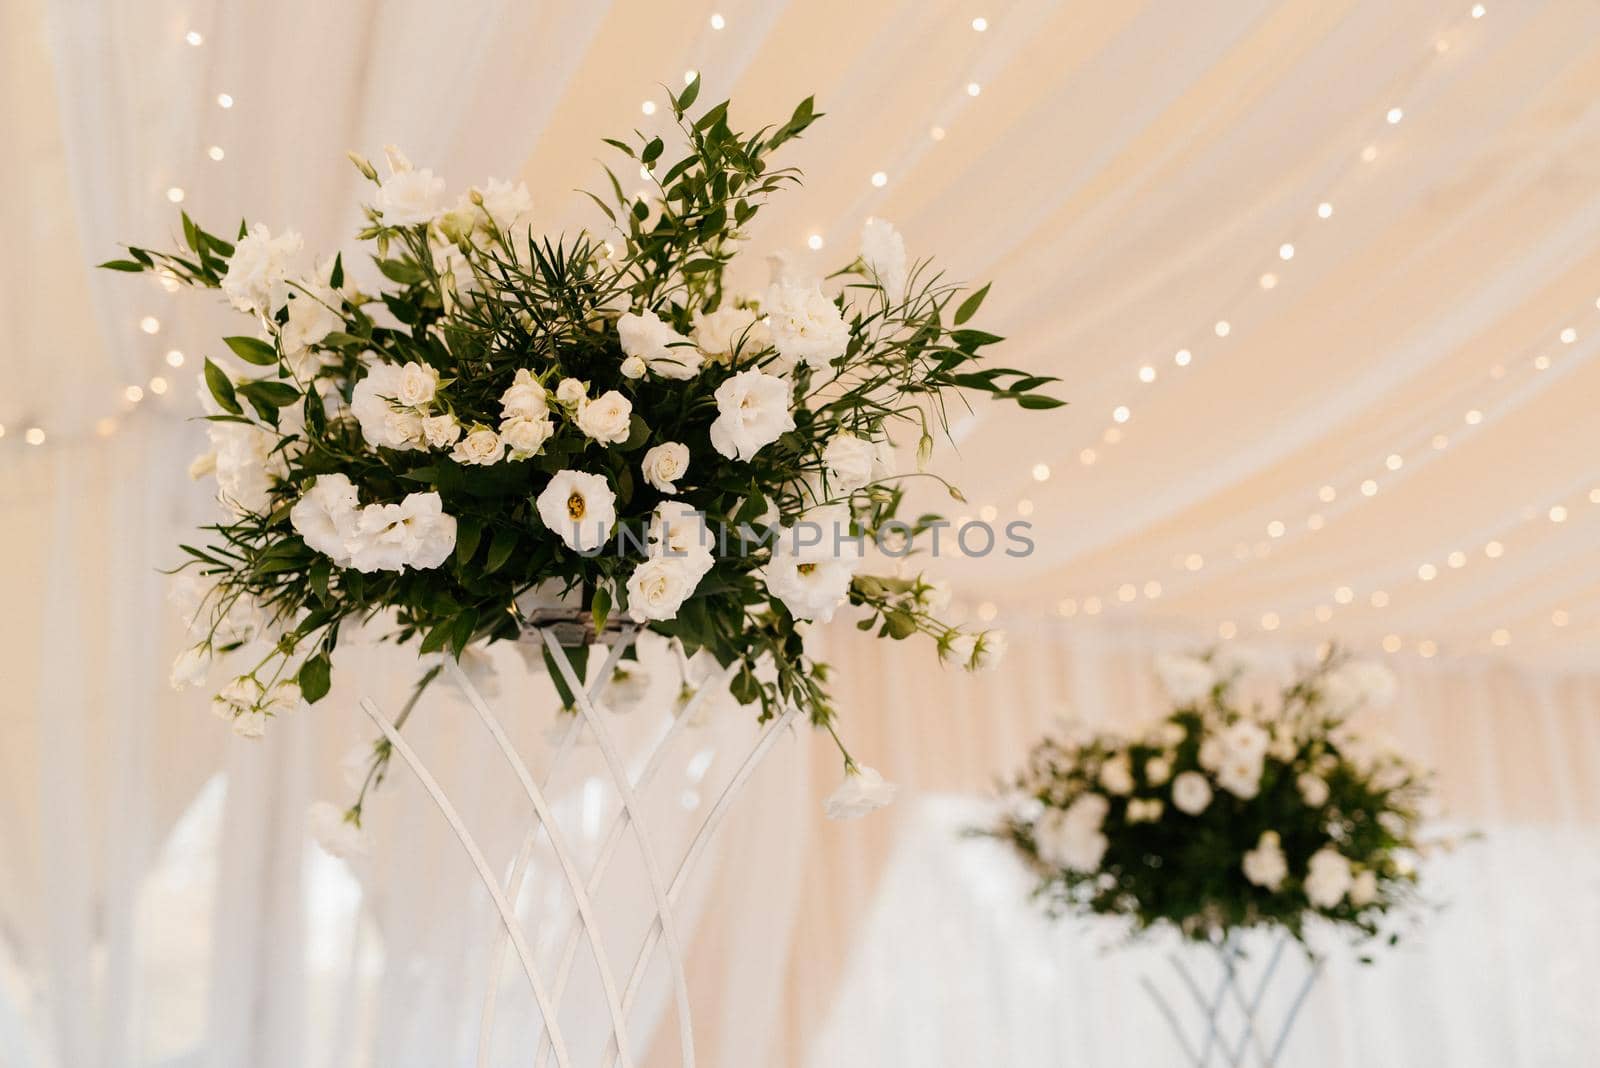 elegant wedding decorations made of natural flowers by Andreua